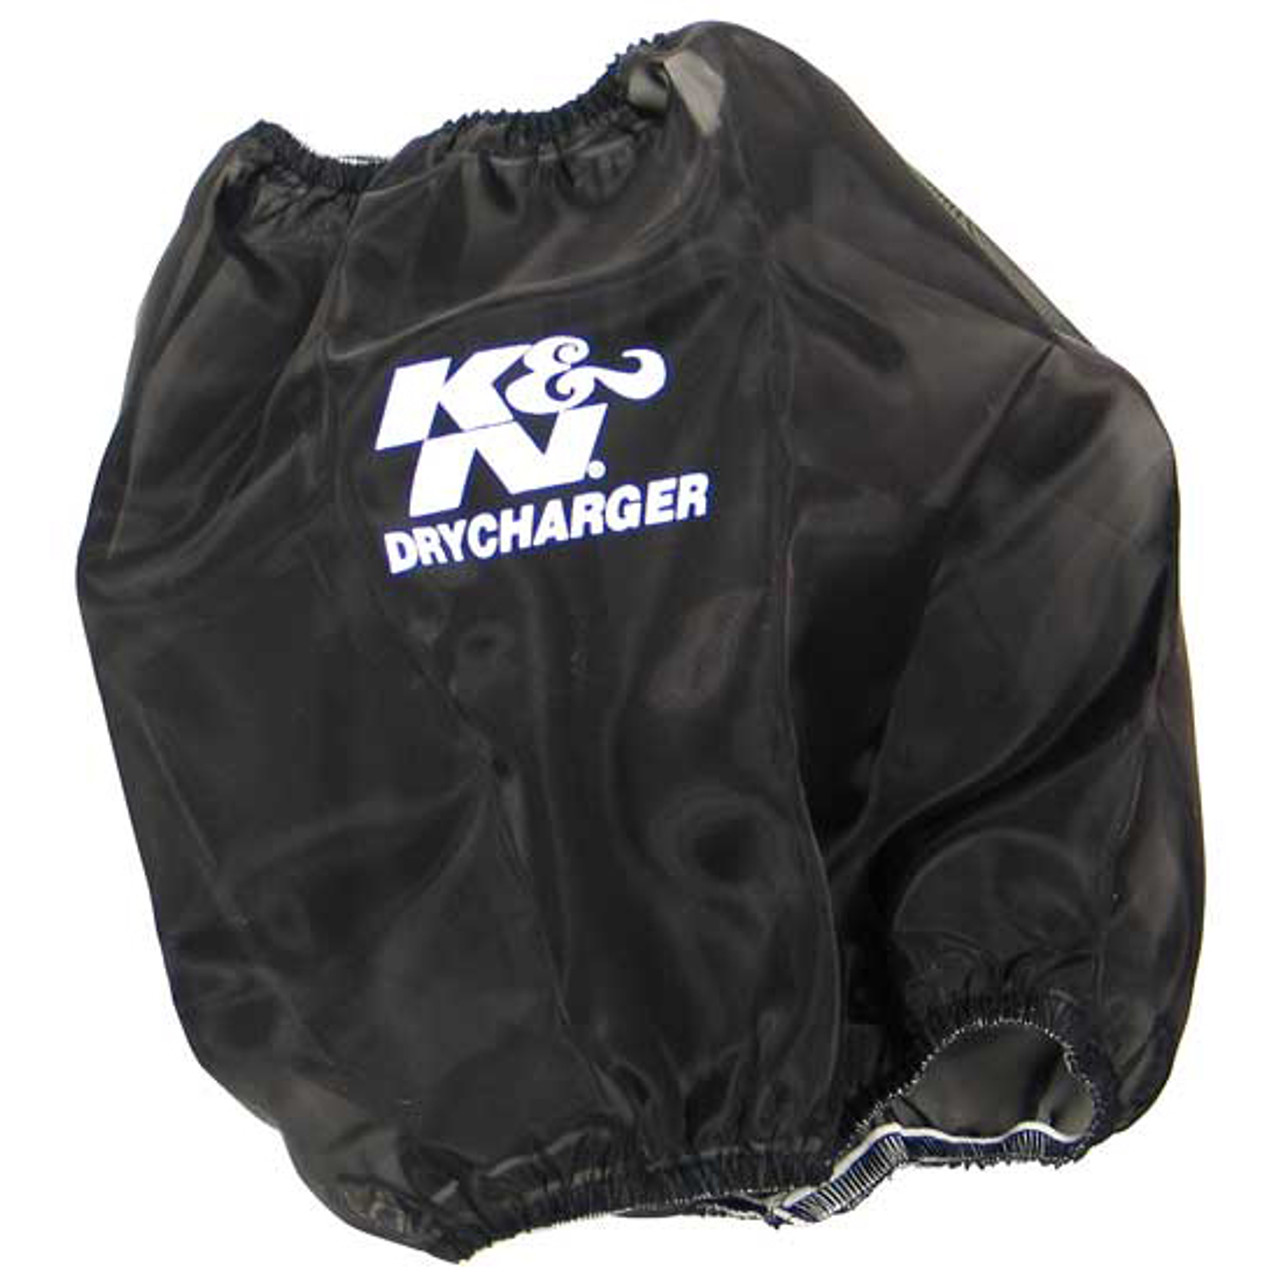 K&N 6.7L Powerstroke Drycharger Air-Filter Wrap